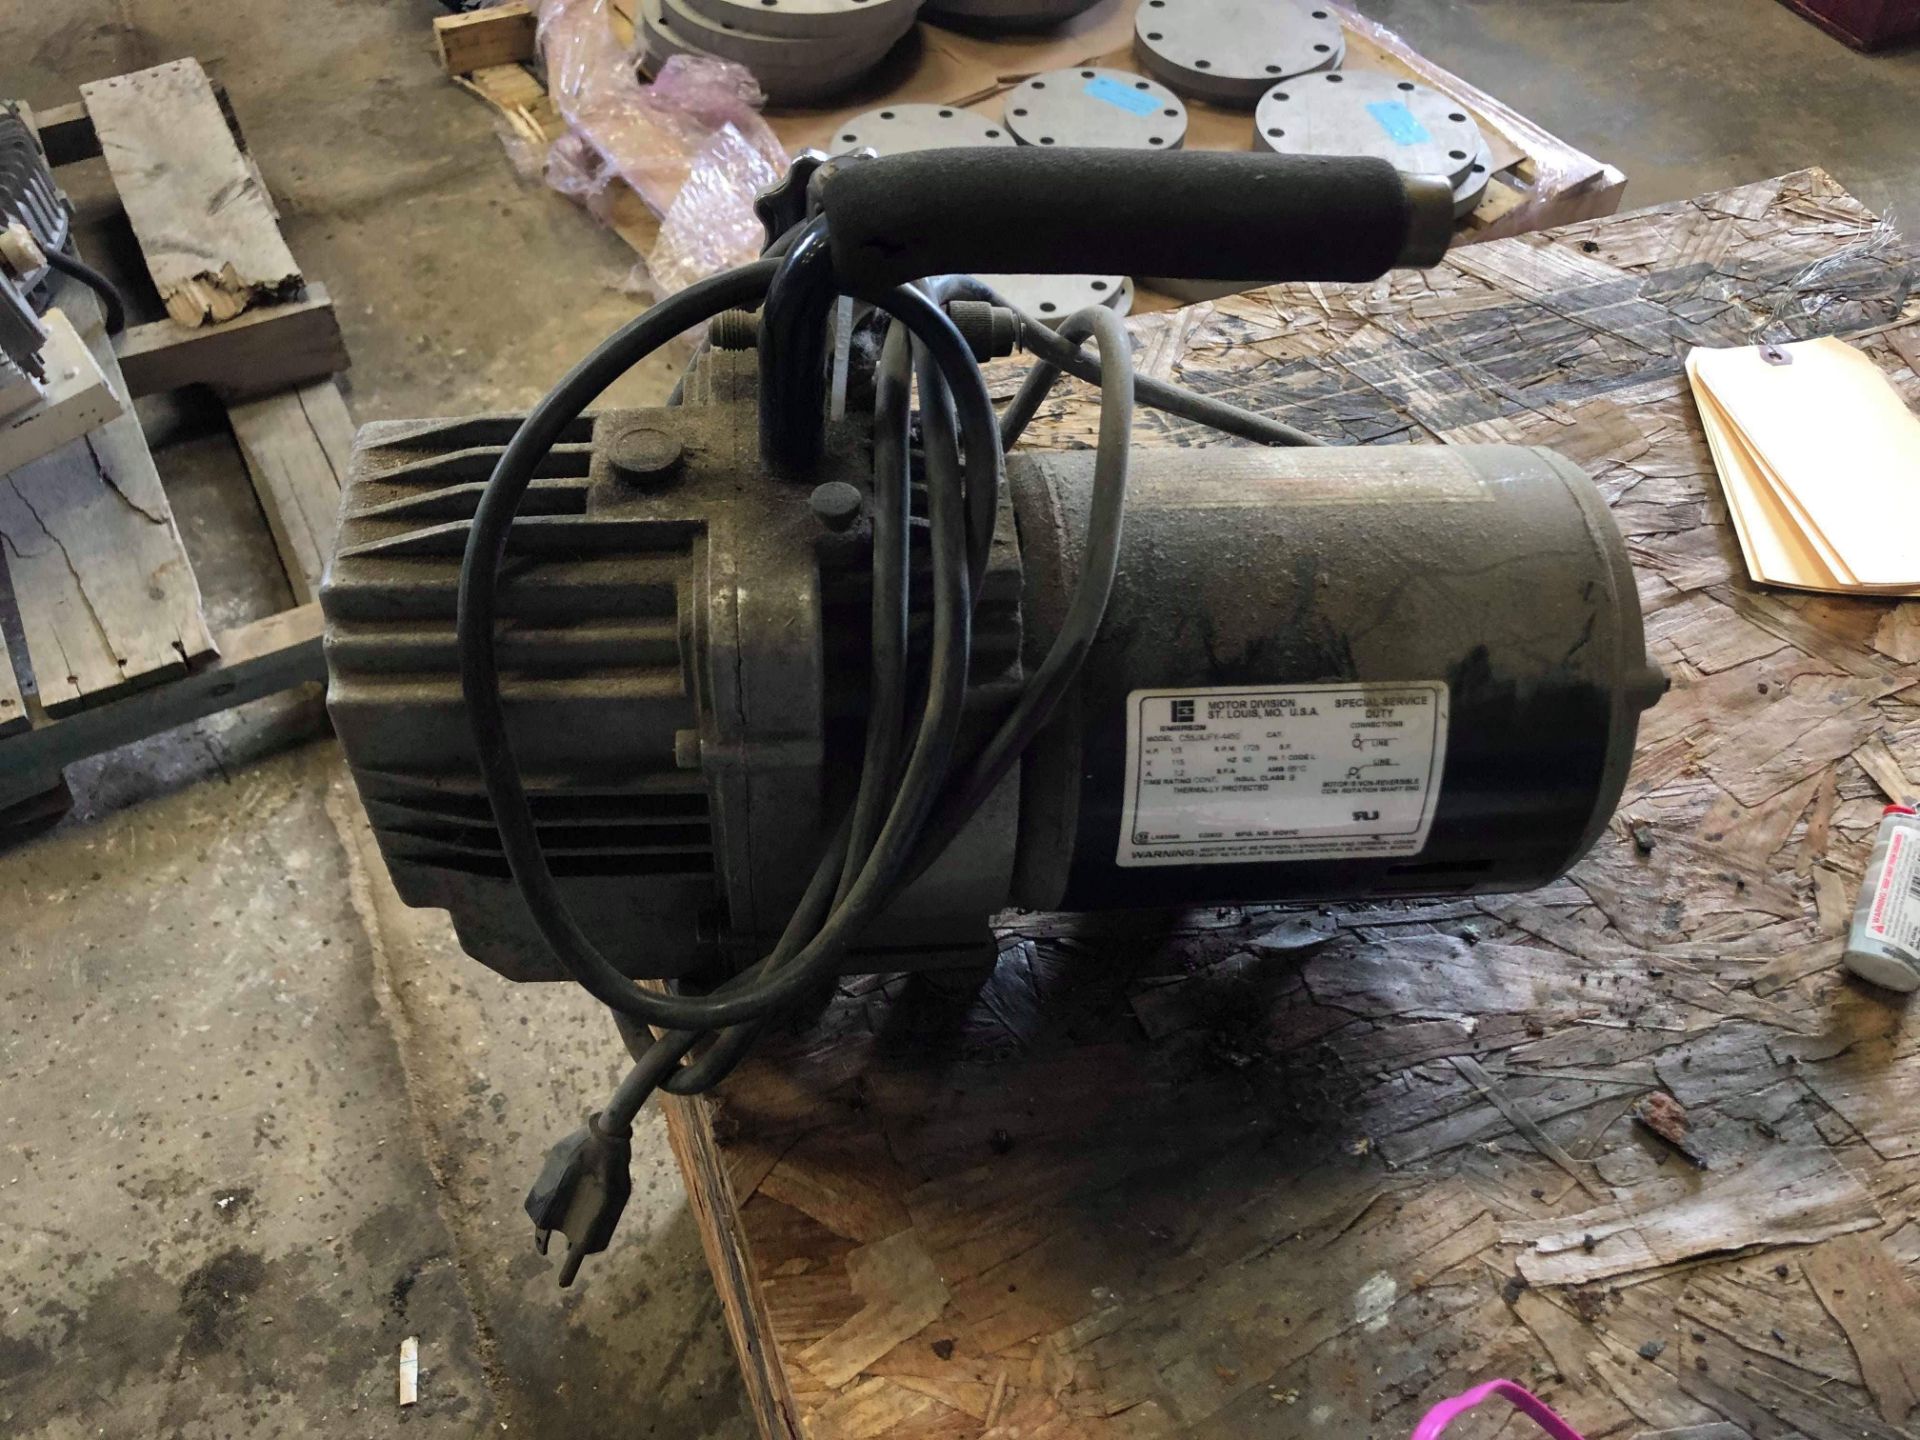 Emerson Motor Division 1/3 hp Motor, Model C55JXFY-4450, S/N 035537 with 115 Volt, 1725 RPM,